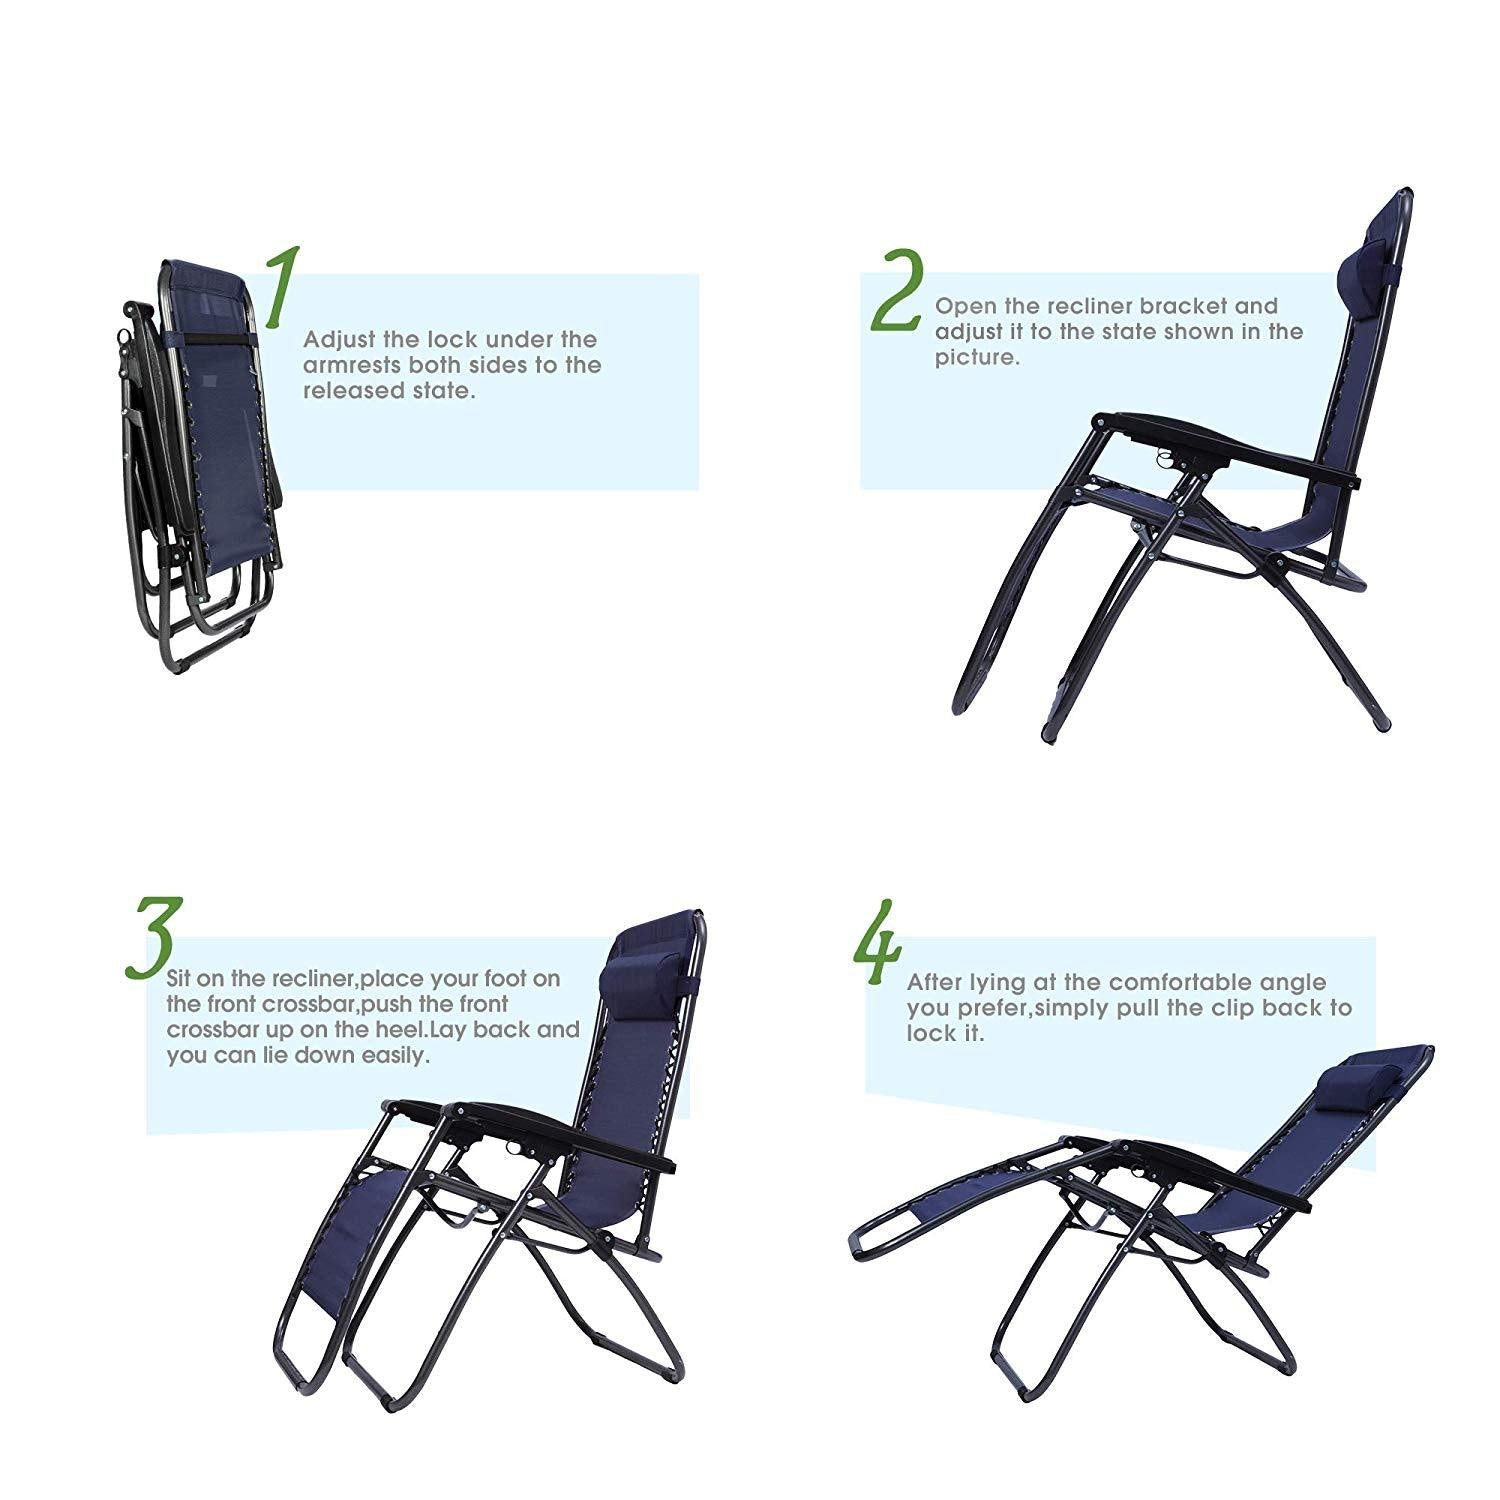 Mydepot Adjustable Zero Gravity Patio Lounge Chairs, 2PC Blue, Patio Chairs, Comfortable, Durable, Outdoor Seating - image 3 of 7